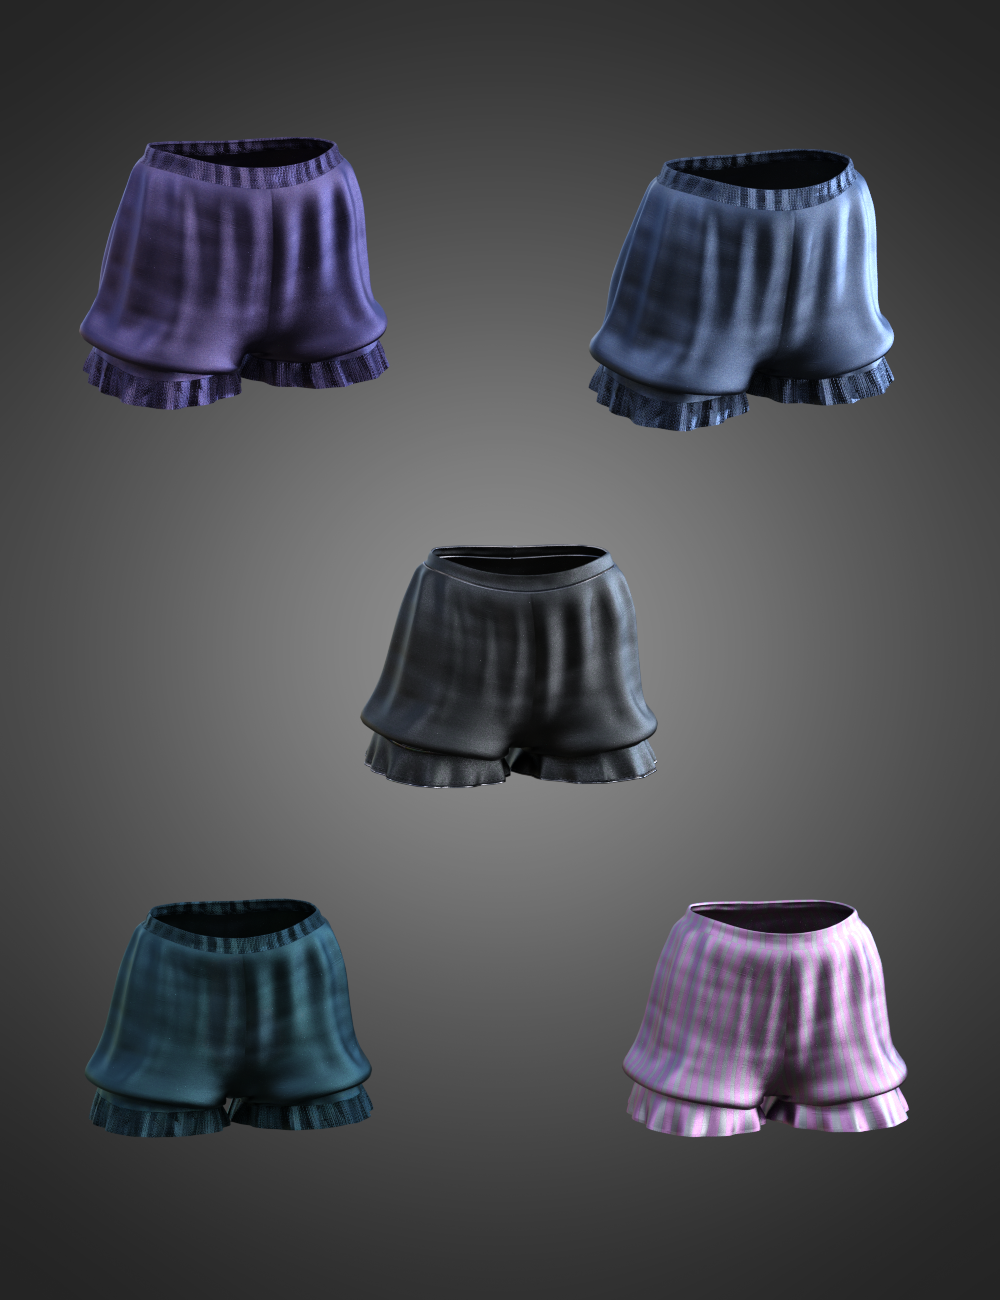 CB Luna Spell Outfit dForce Shorts for Genesis 8 and 8.1 Females by: CynderBlue, 3D Models by Daz 3D